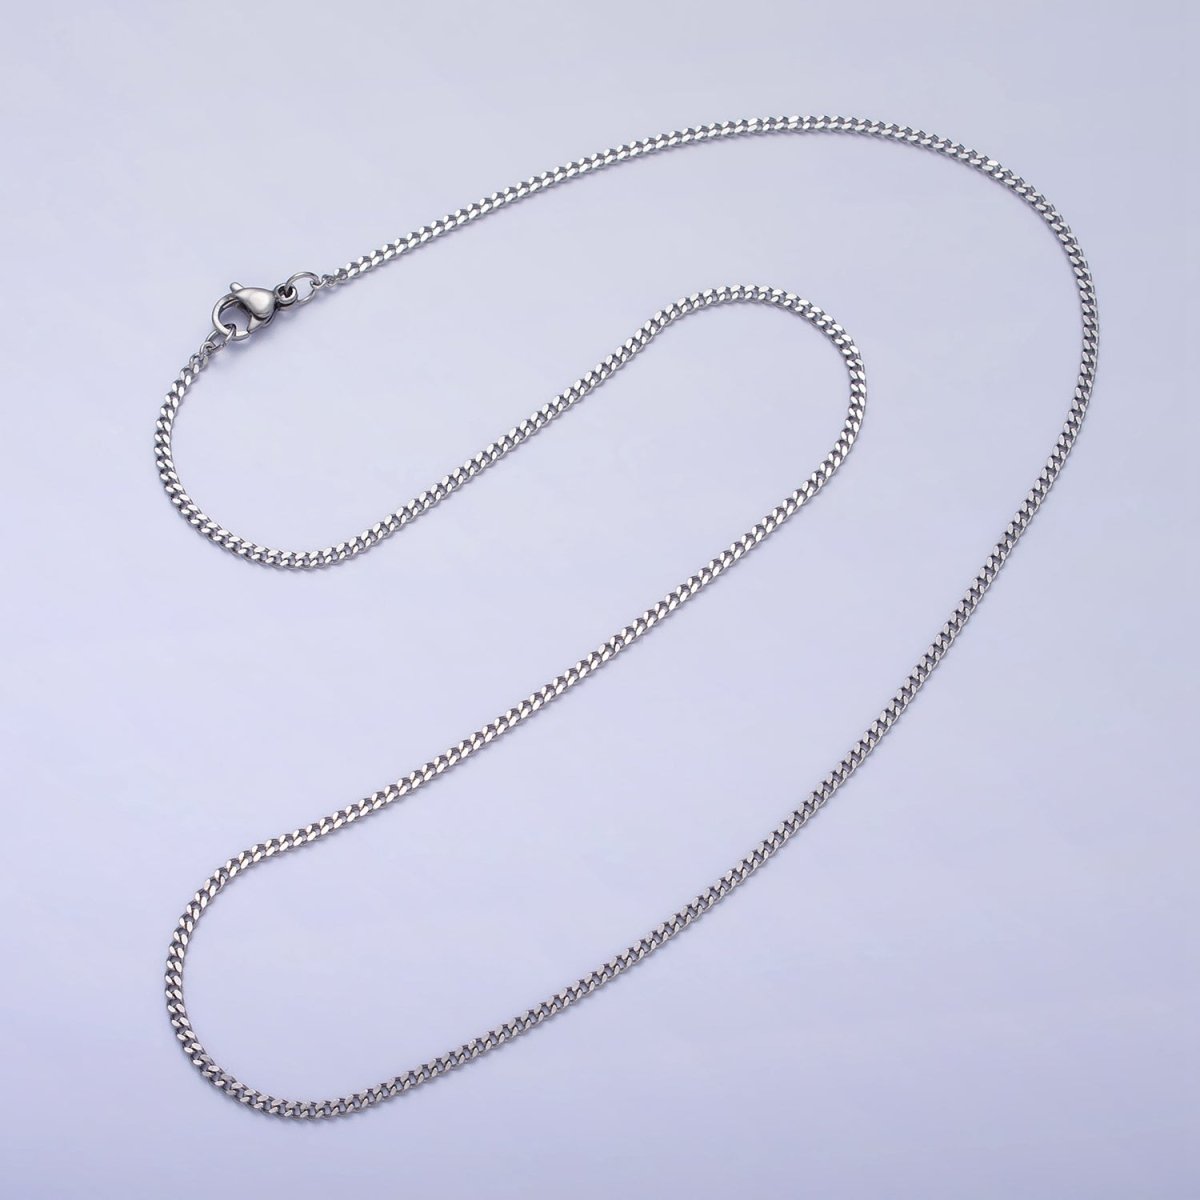 Dainty Stainless Steel Curb Chain Necklace 1.2mm Thin Gold Box Chain 17.7 inches for Jewelry Making | WA-1701 WA-1702 Clearance Pricing - DLUXCA